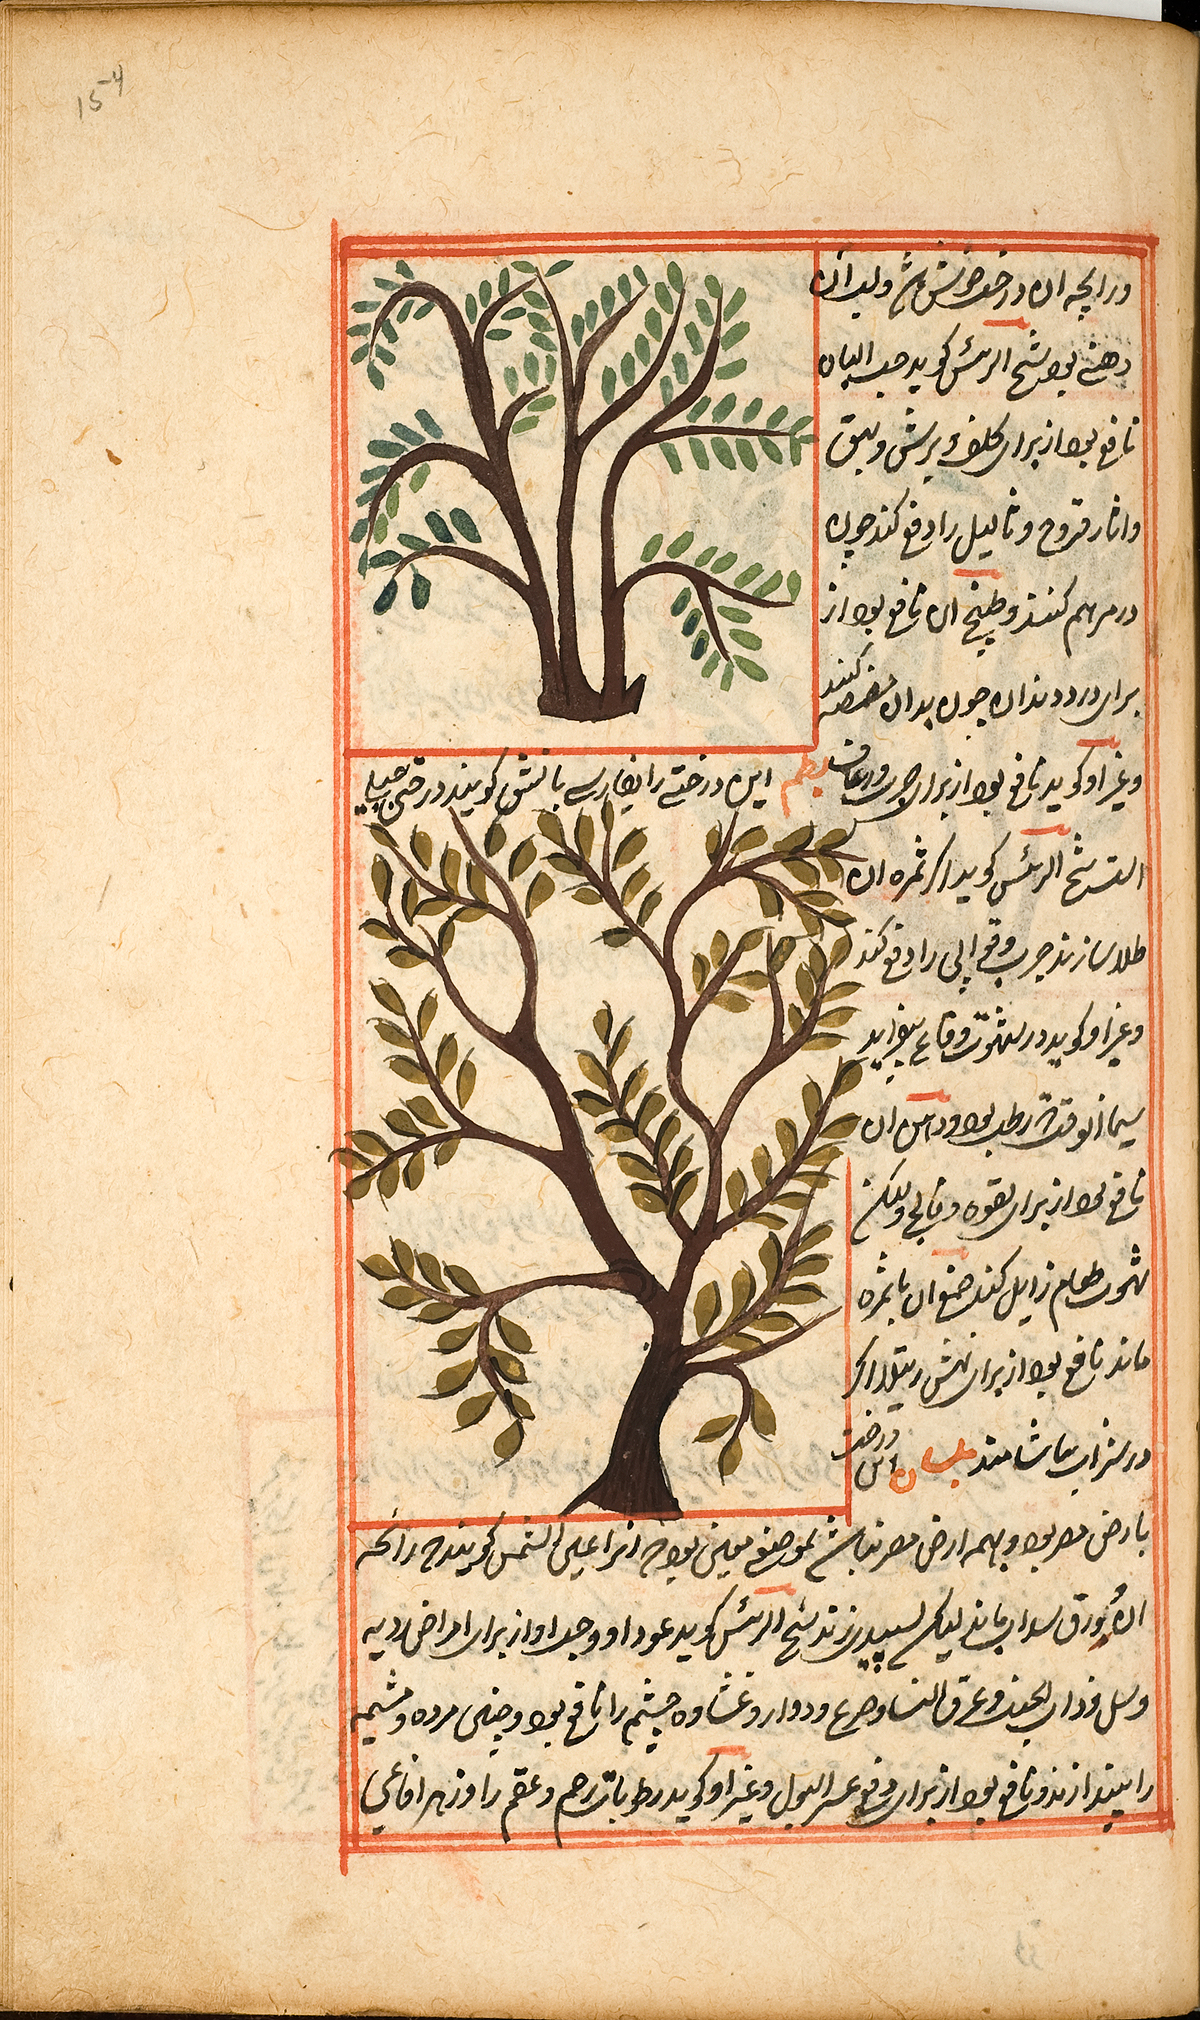 Two trees, the Ban tree and the Bathm tree, the former with green leaves, the latter with brown leaves, surrounded by Persian text and a red double ruled border.